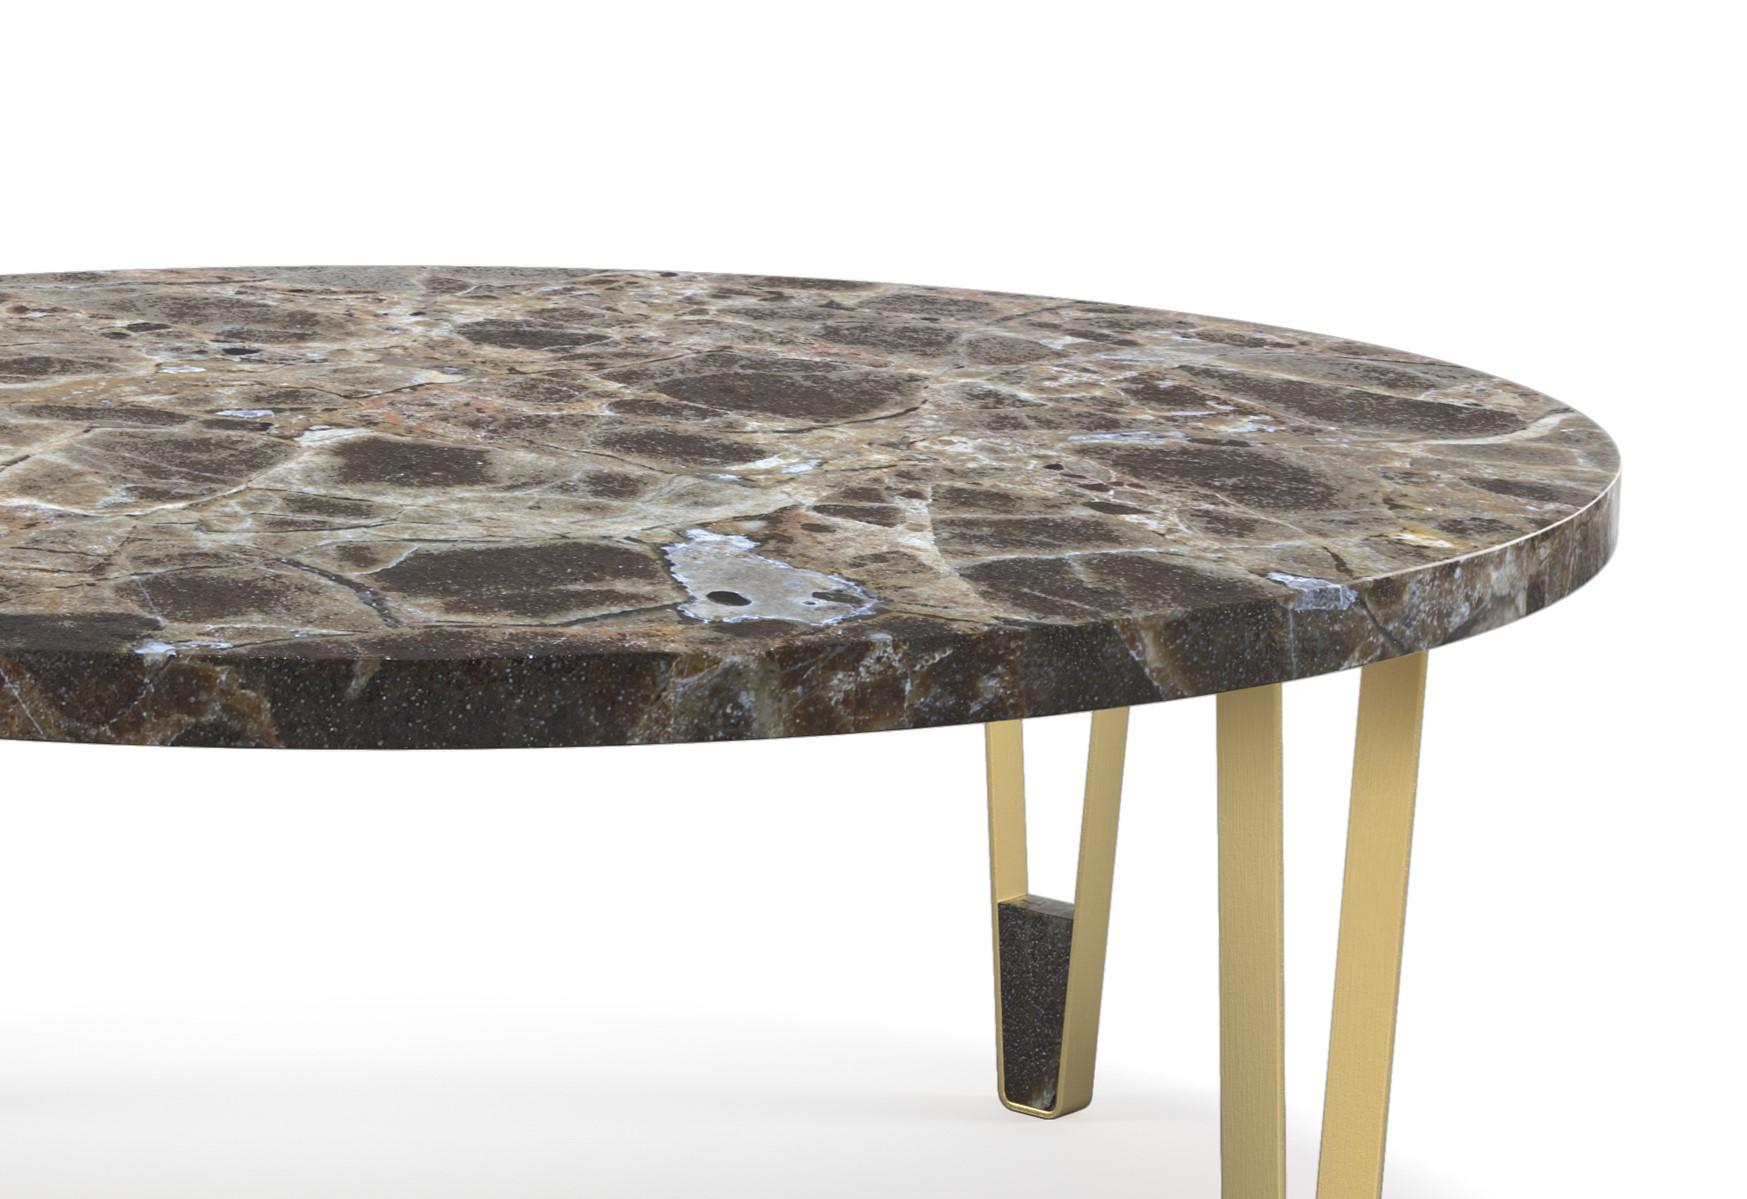 Portuguese Ionic Round Emperador Marble Coffee Table by InsidherLand For Sale